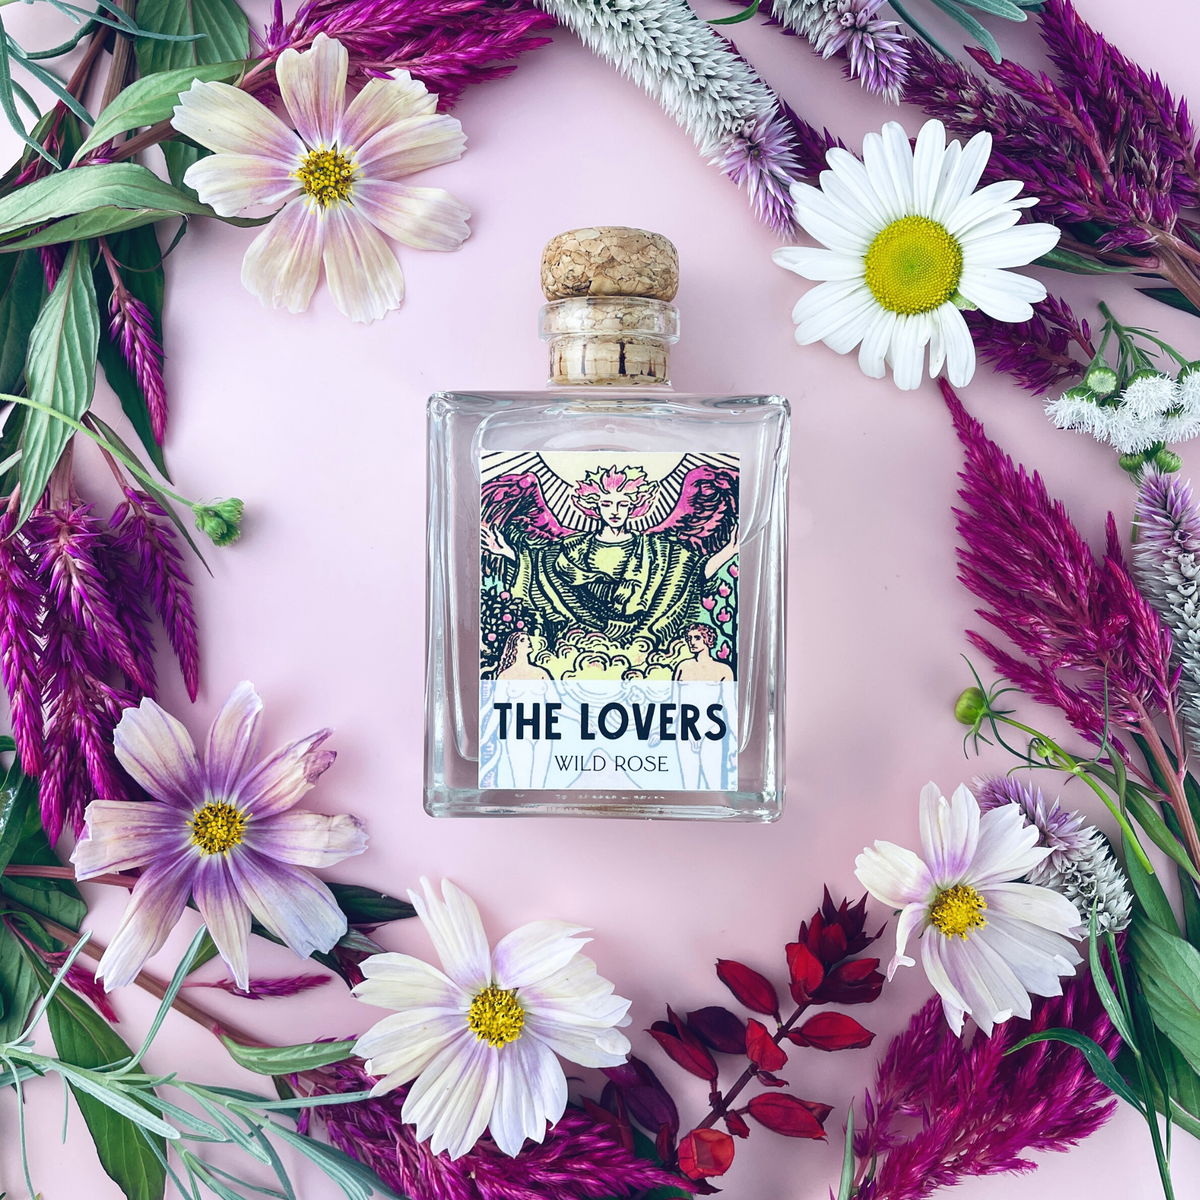 The Lovers Tarot Card Home Reed Diffuser (Wild Rose)